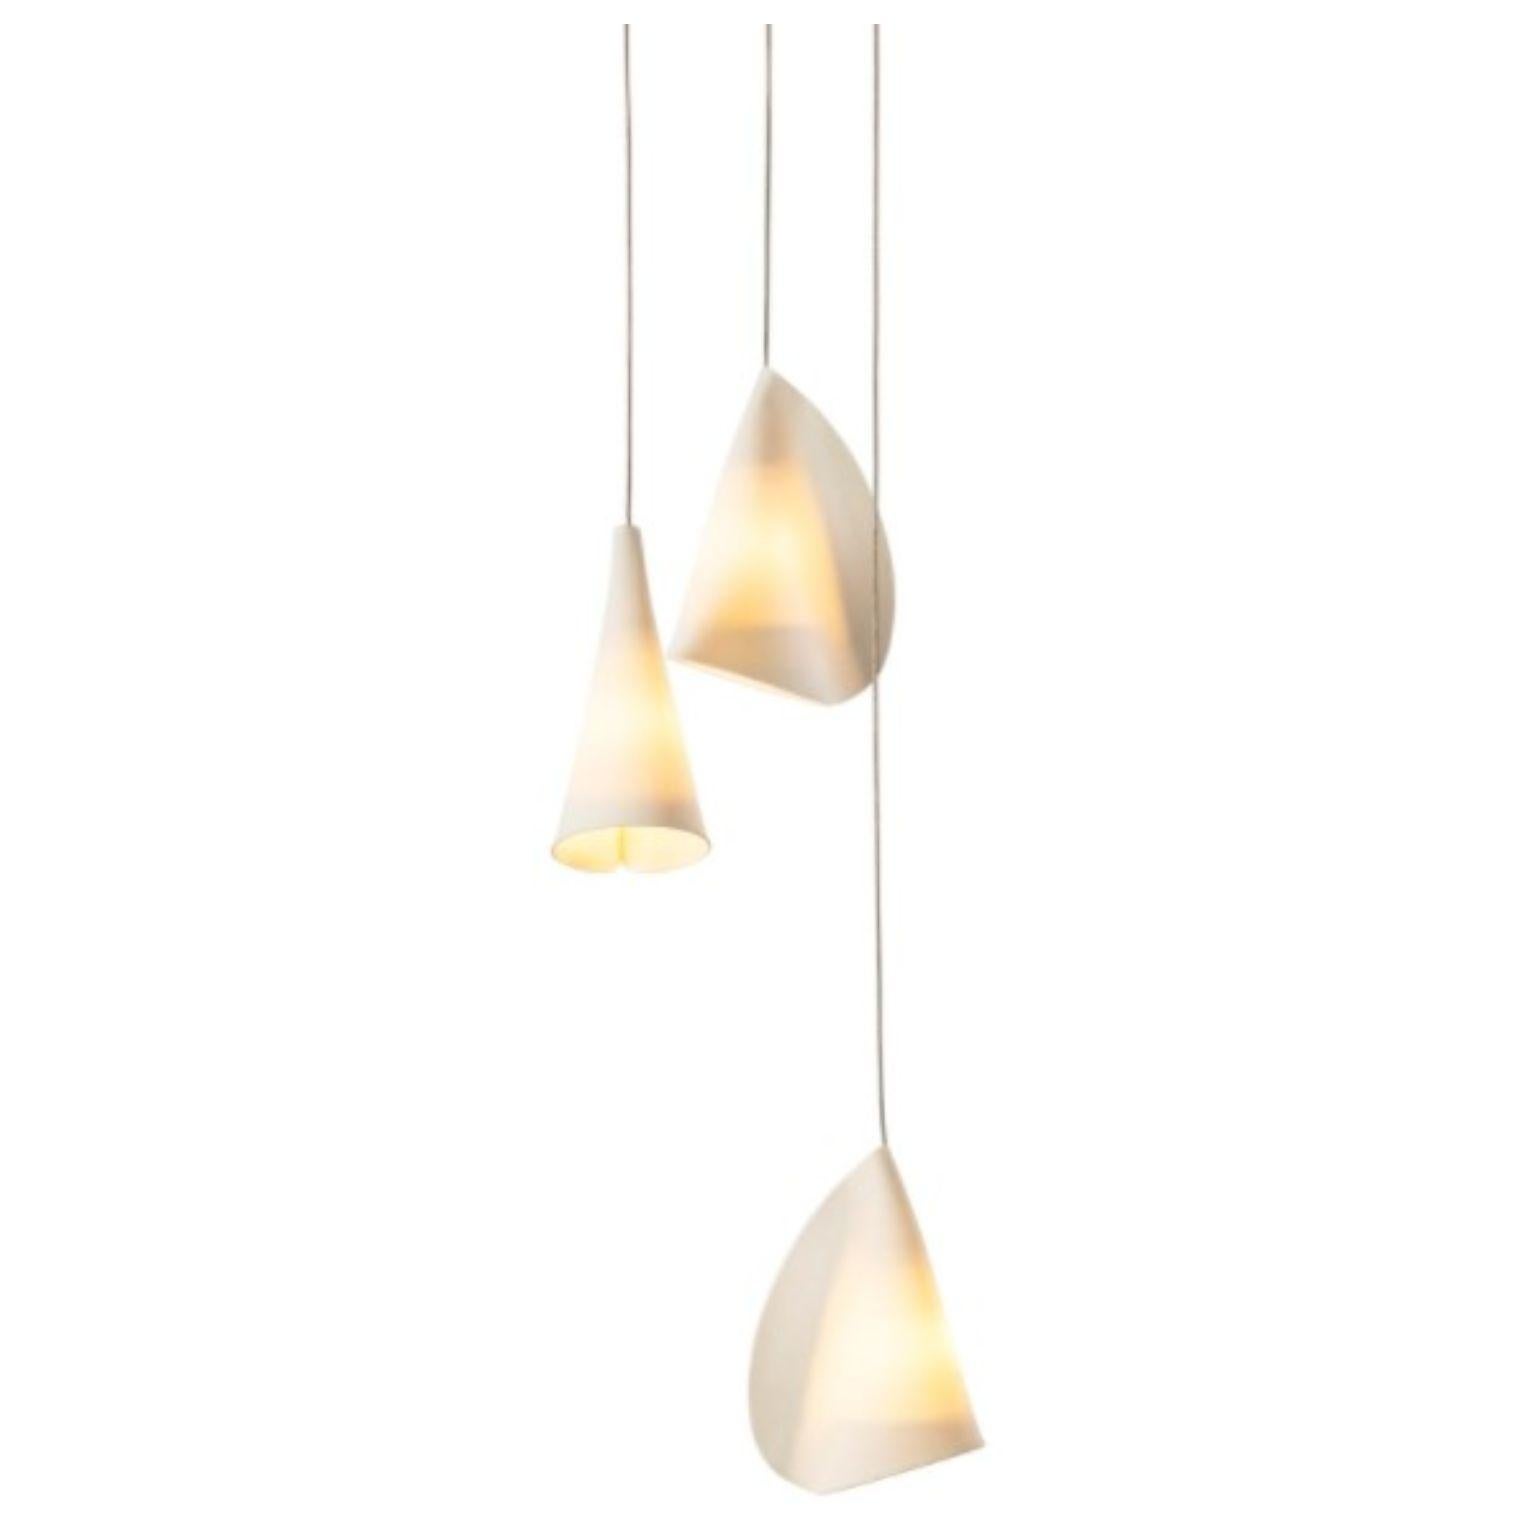 21.3 Pendant by Bocci
Dimensions: D15.2 x H300 cm
Materials:brushed nickel,round canopy.
Weight: 1.8 kg
Also available in different dimensions.

All our lamps can be wired according to each country. If sold to the USA it will be wired for the